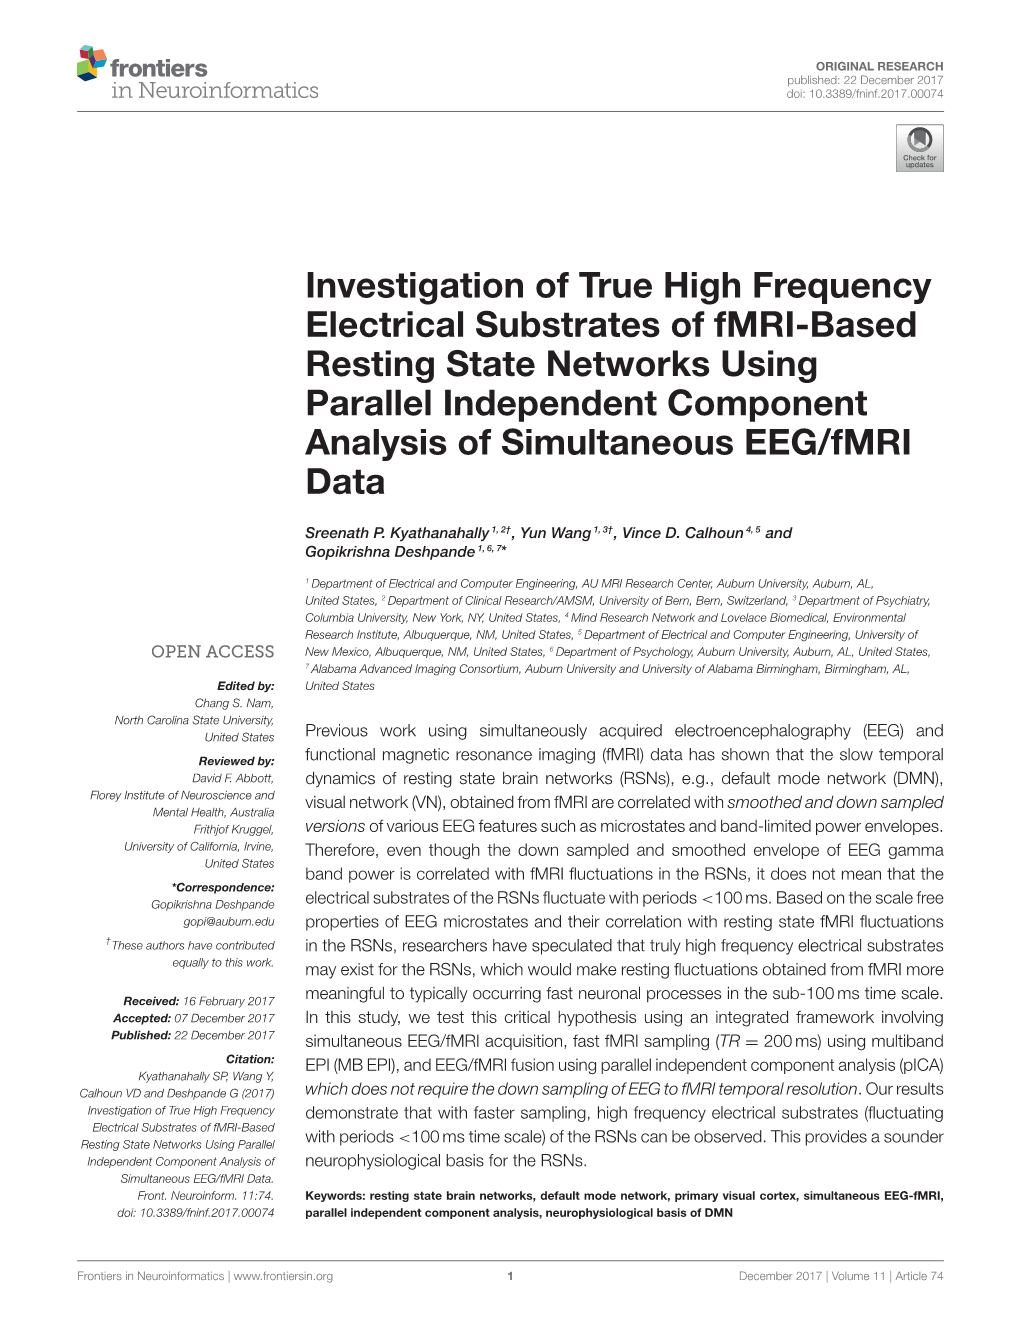 Investigation of True High Frequency Electrical Substrates of Fmri-Based